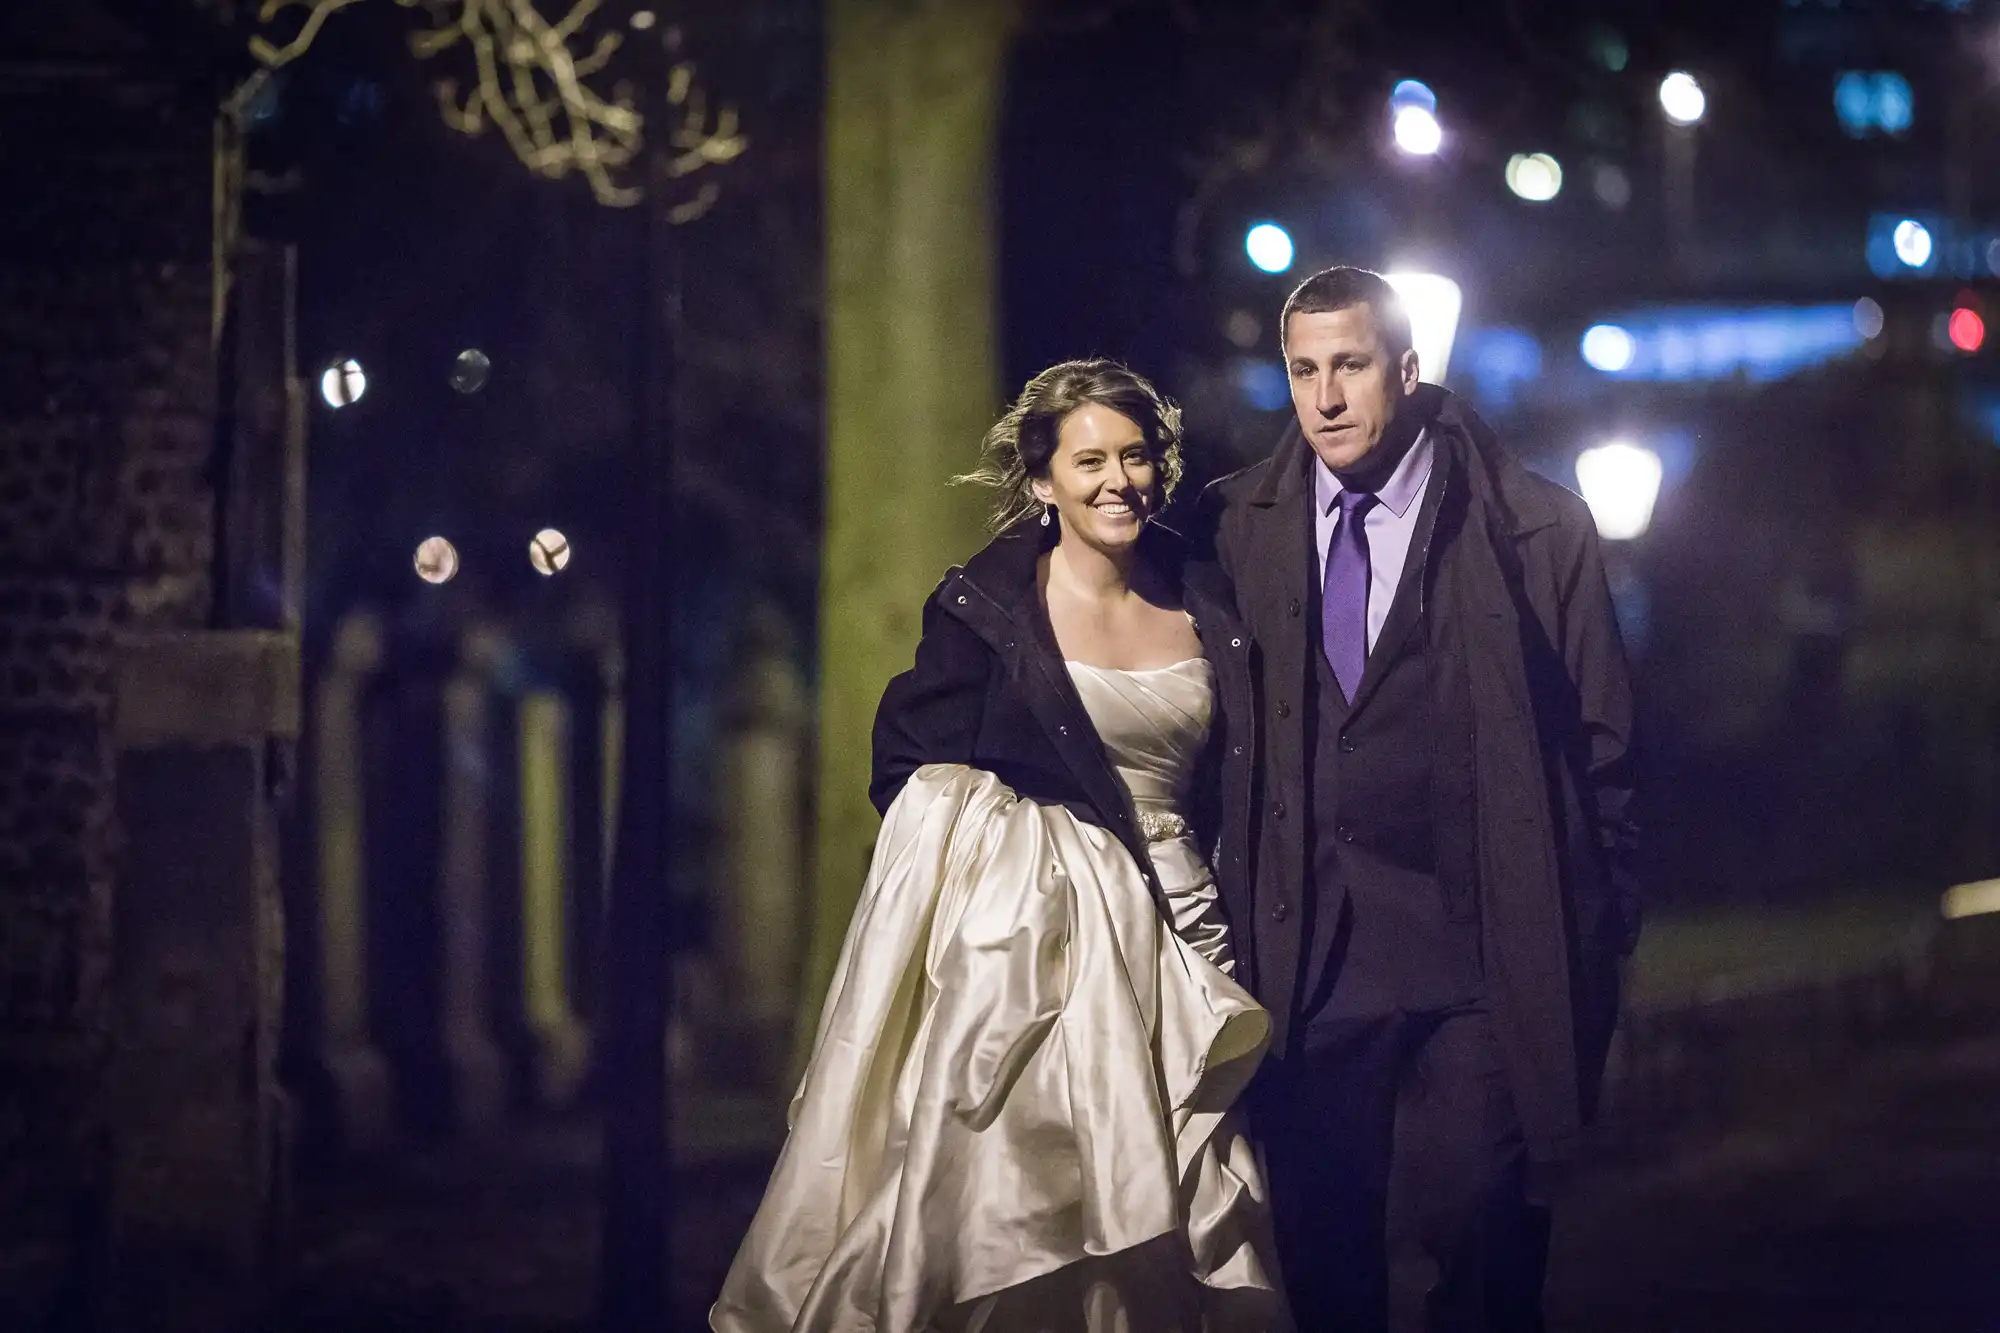 A bride in a white dress and a man in a suit and overcoat walk together at night, smiling, with streetlights in the background.